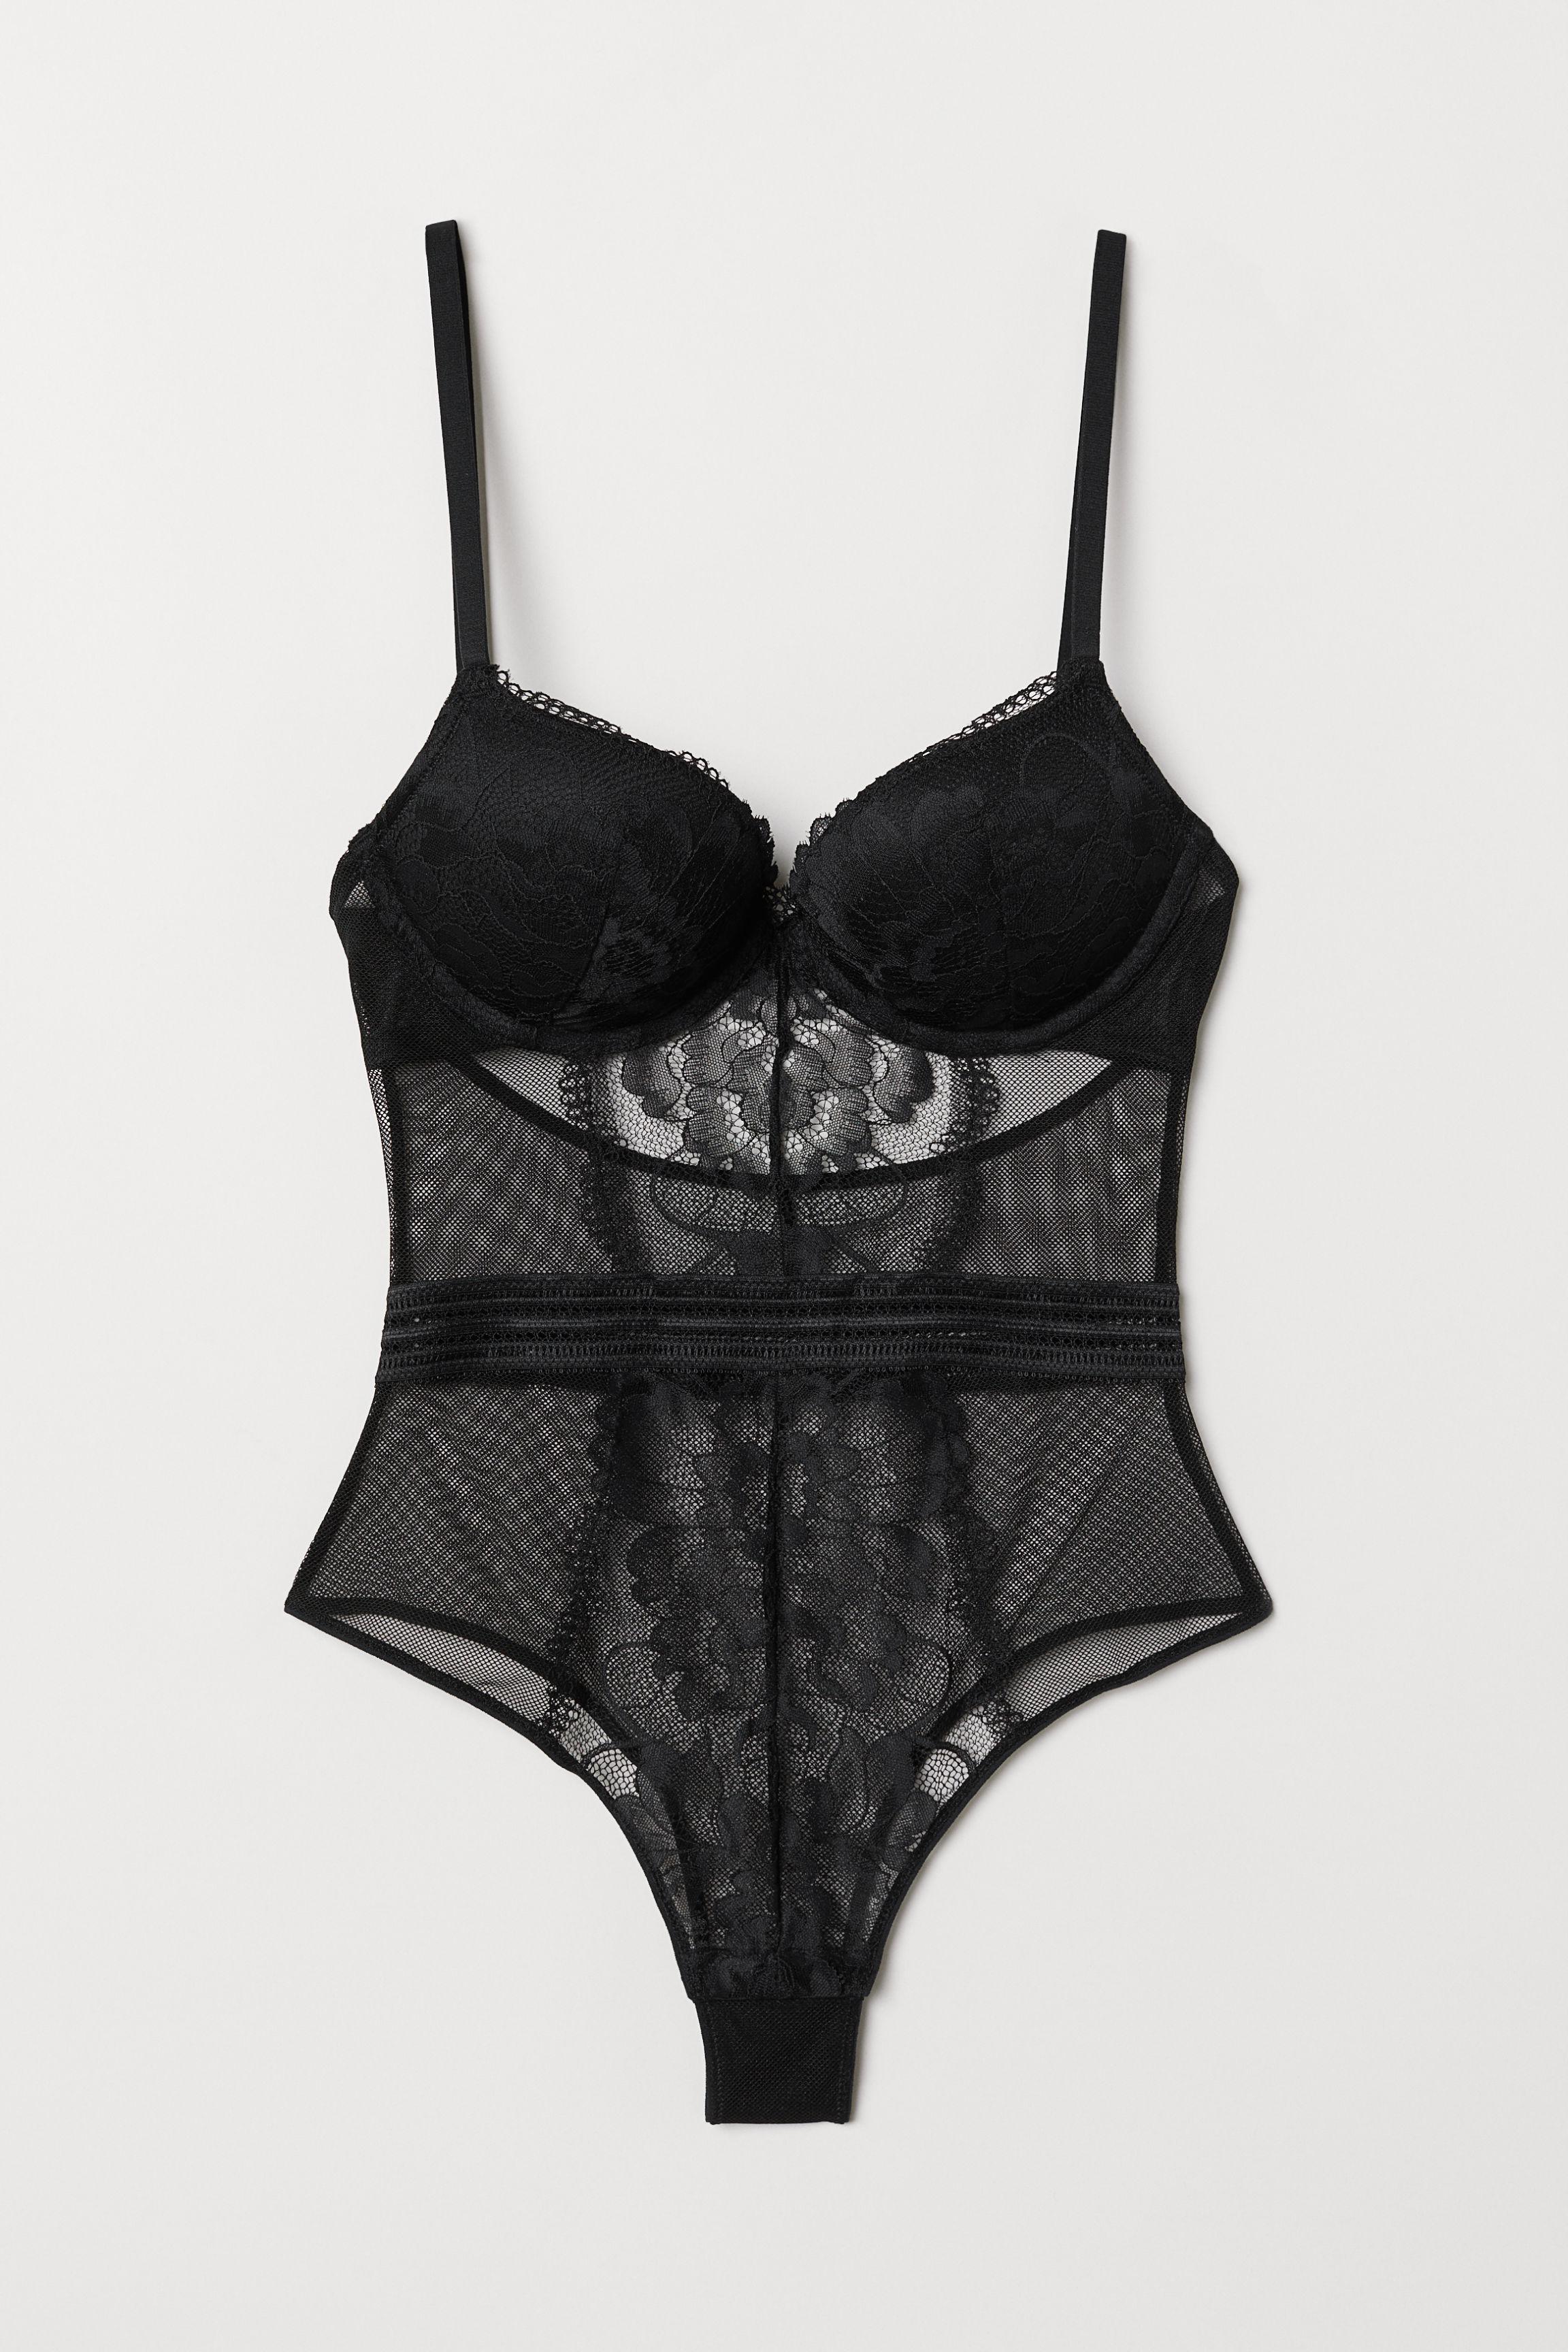 H&M Lace Super Push-up Body in Black | Lyst